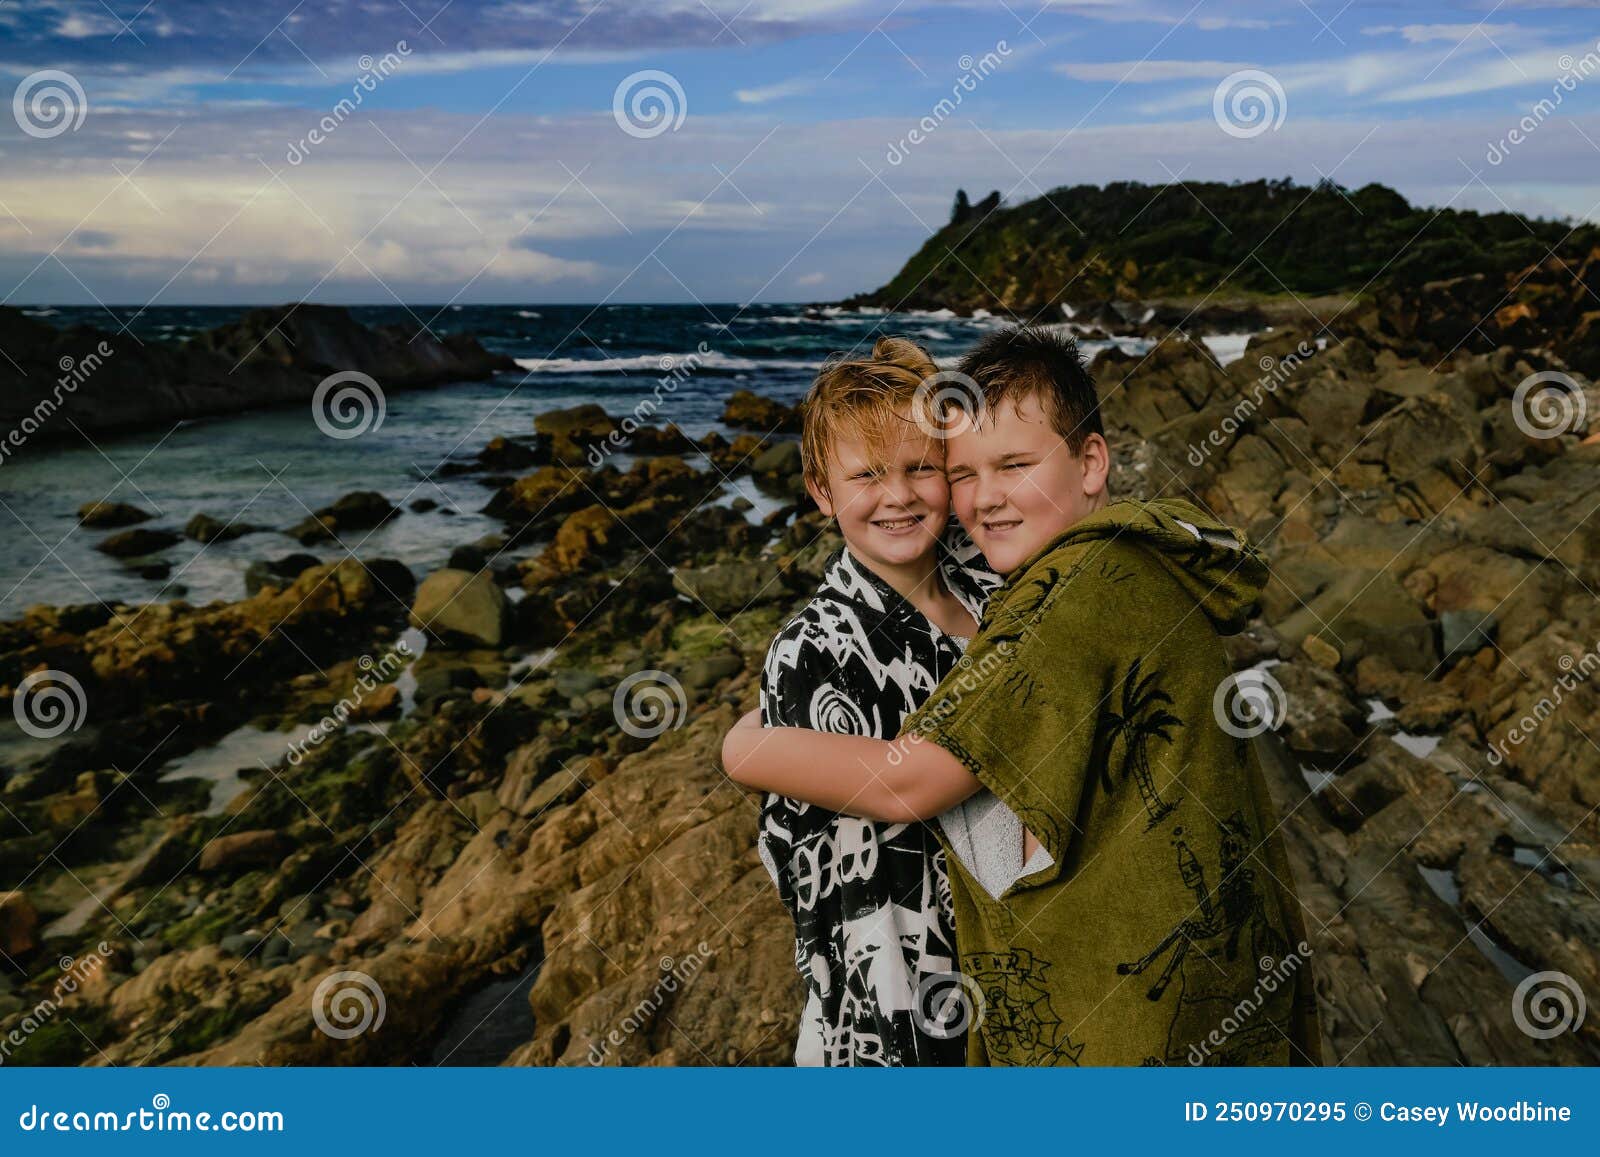 boys wearing hooded towels after swimming mucking around on rocks at the tanks tourist attraction at forster, nsw australia